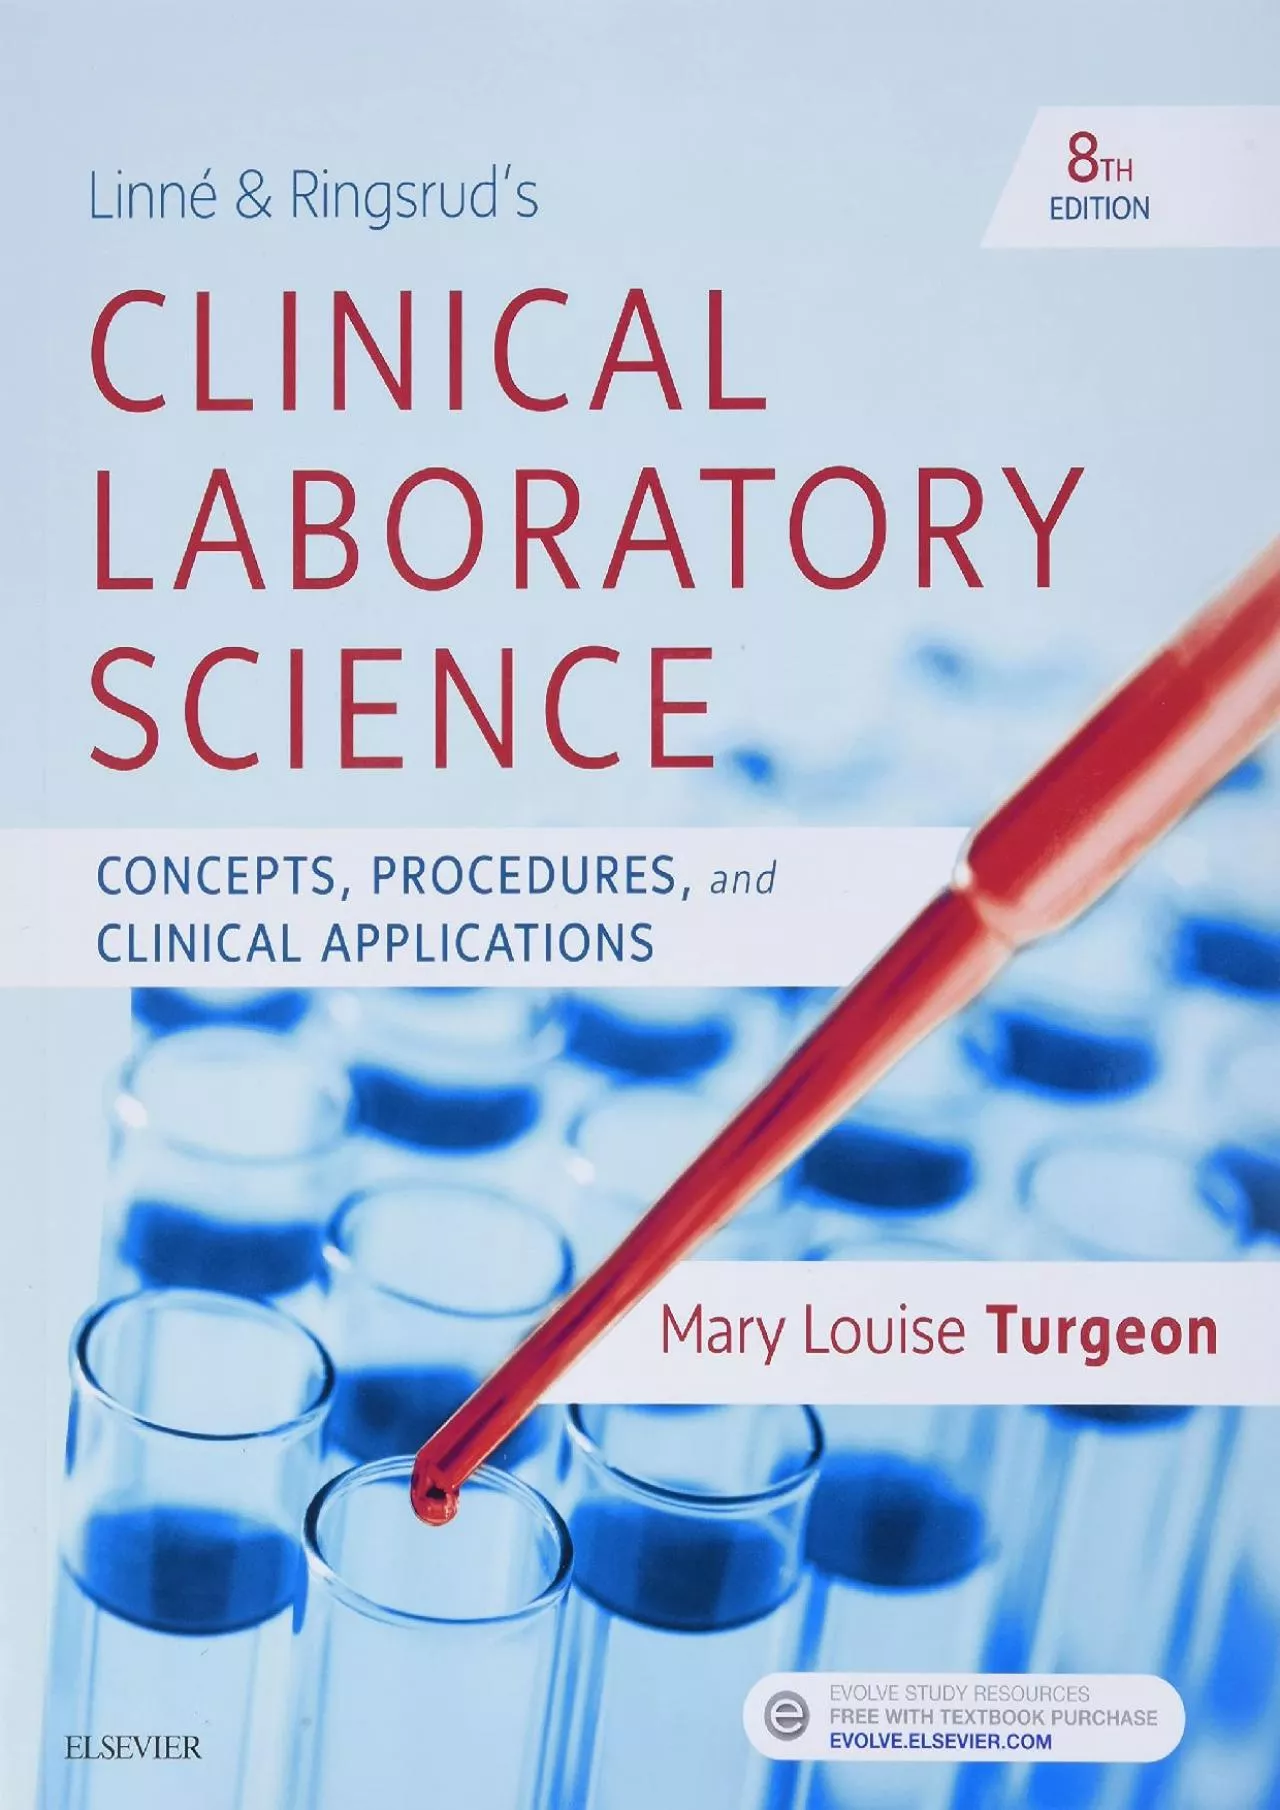 (BOOK)-Linne & Ringsrud\'s Clinical Laboratory Science: Concepts, Procedures, and Clinical